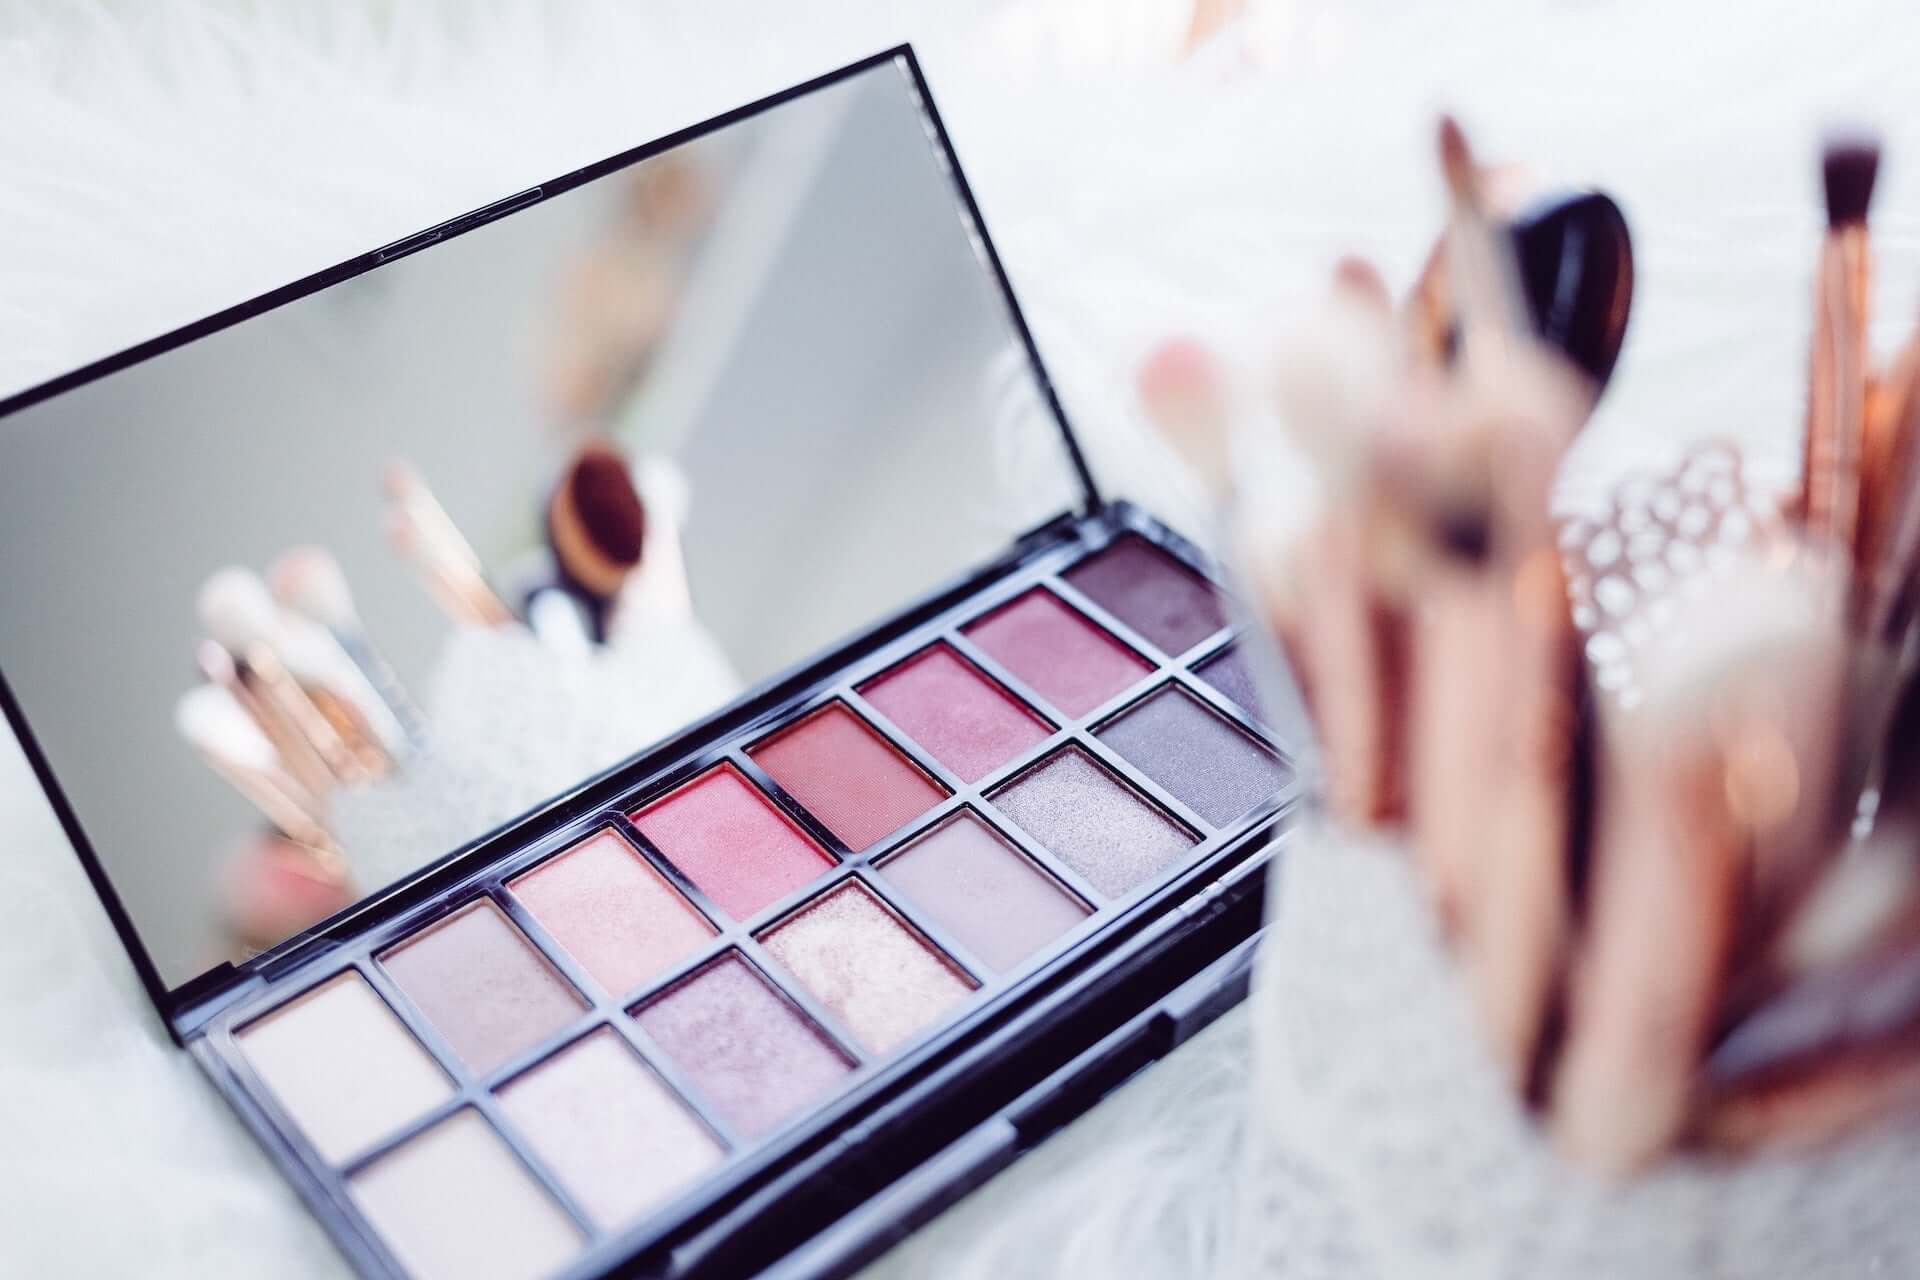 A pink-toned eyeshadow pallet with a mirror, sitting open beside a container of various cosmetic brushes.